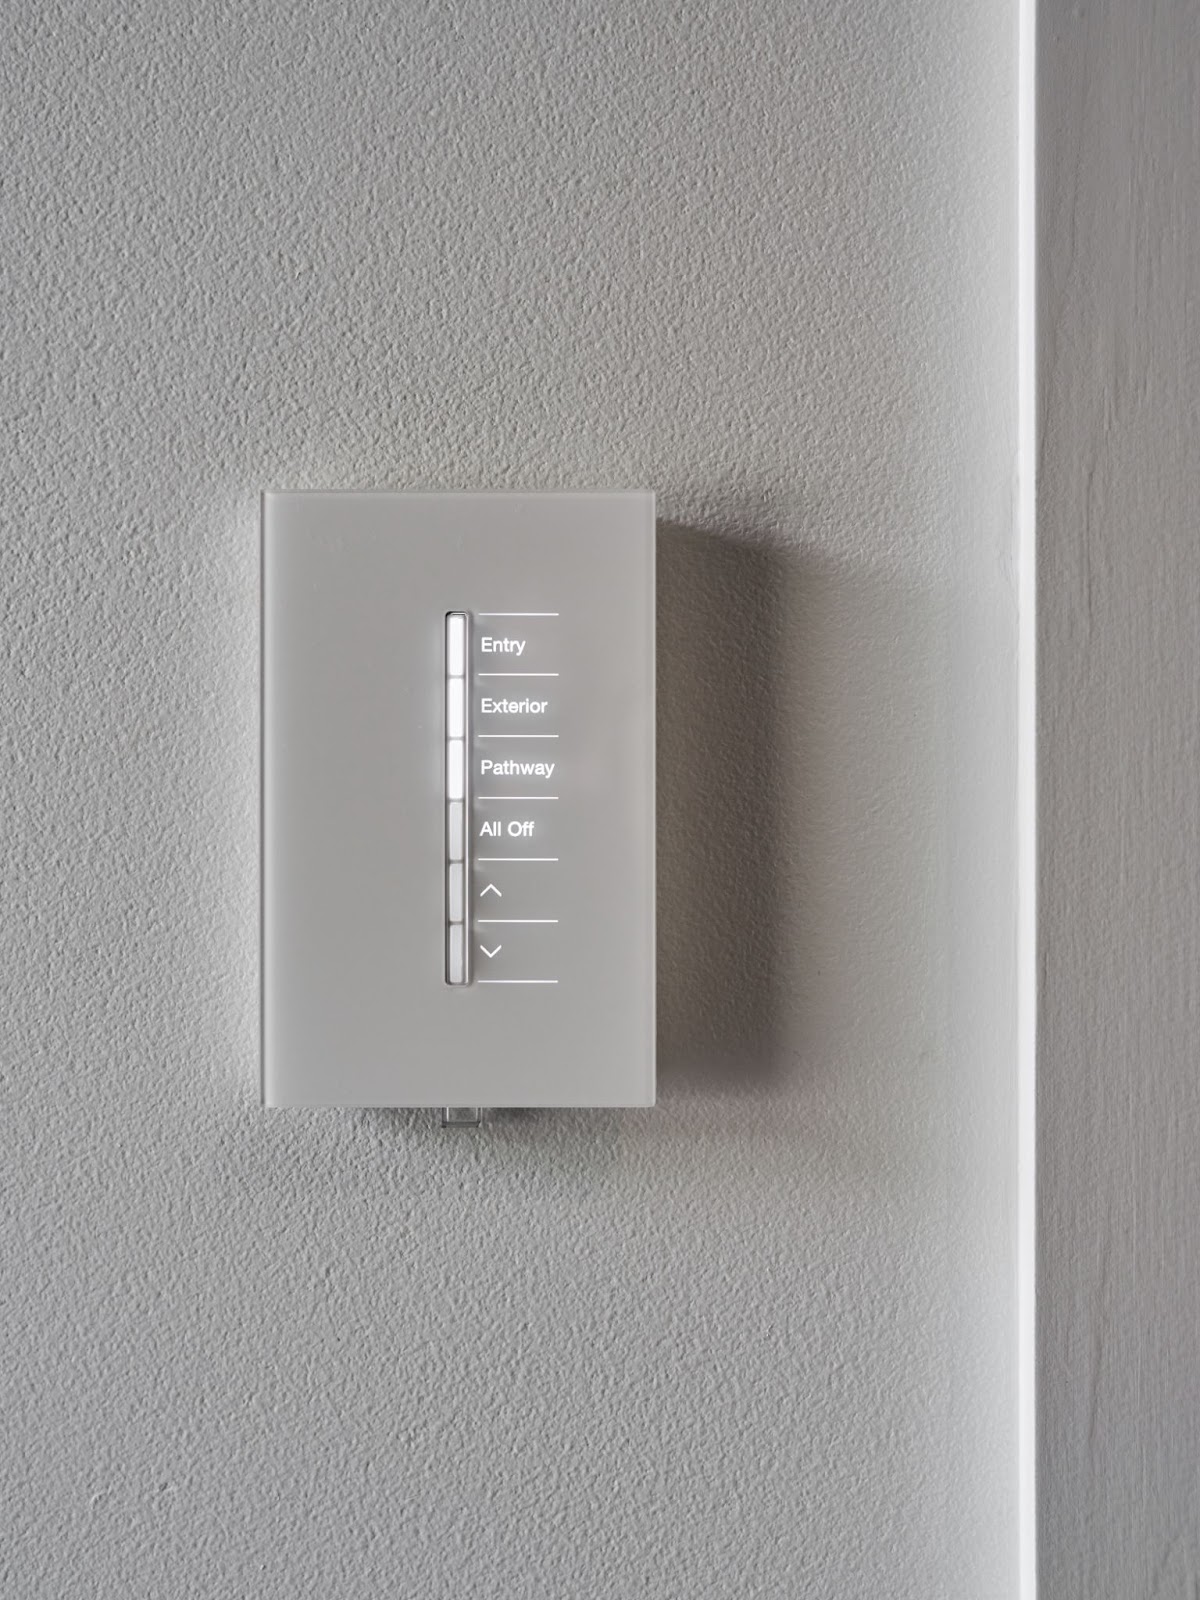 smart home light switch for entry, exterior, and pathway